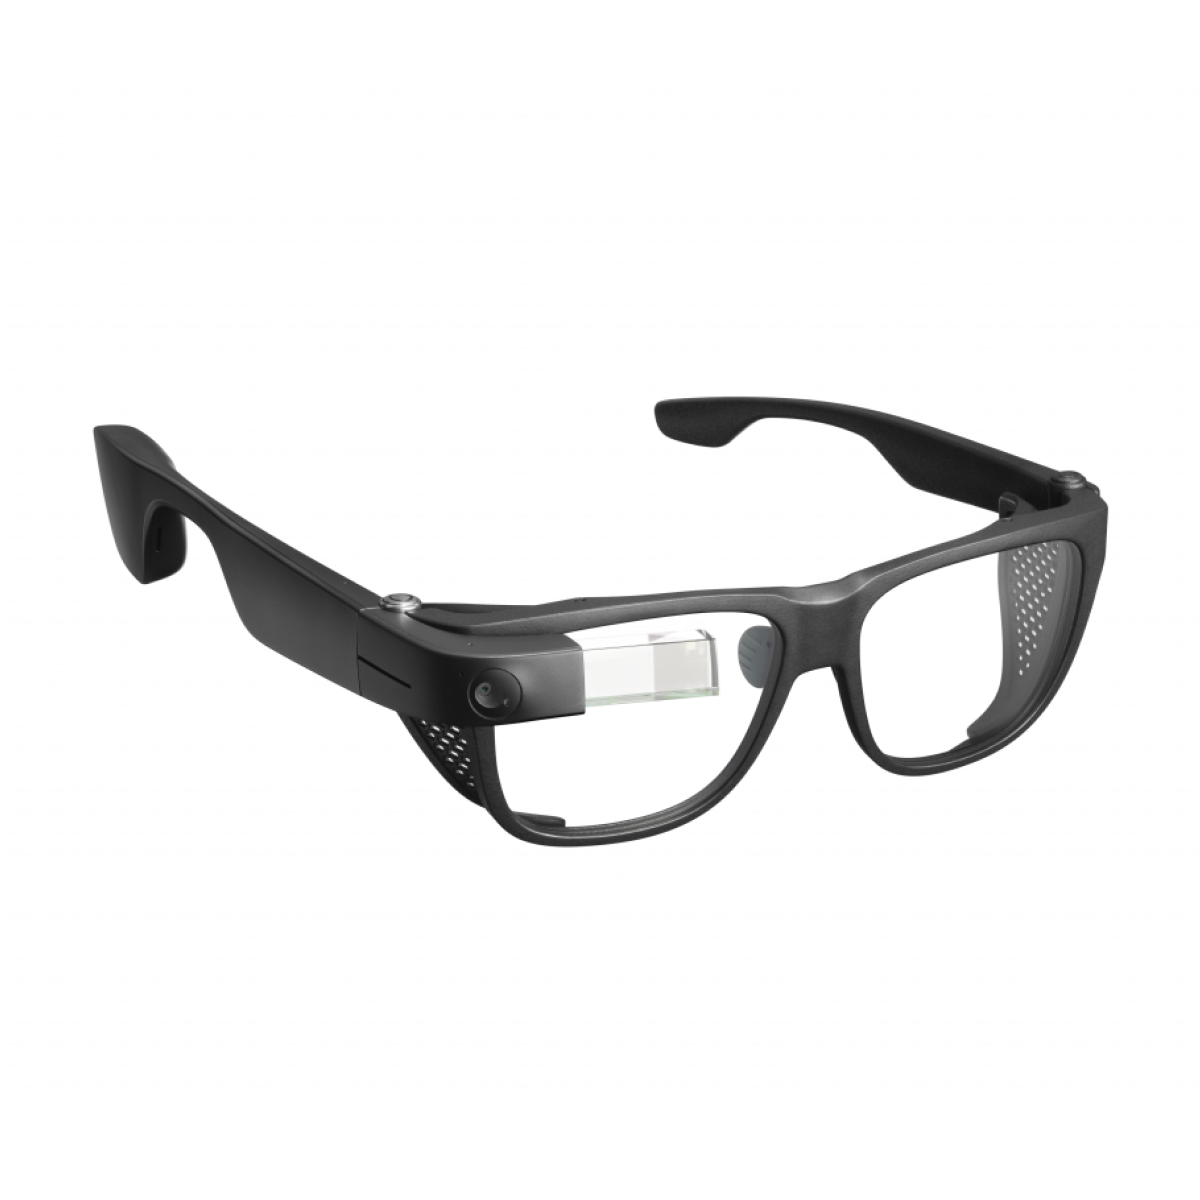 Photo of the Envision Glasses with Smith Optics Frames (3/4 Side View)